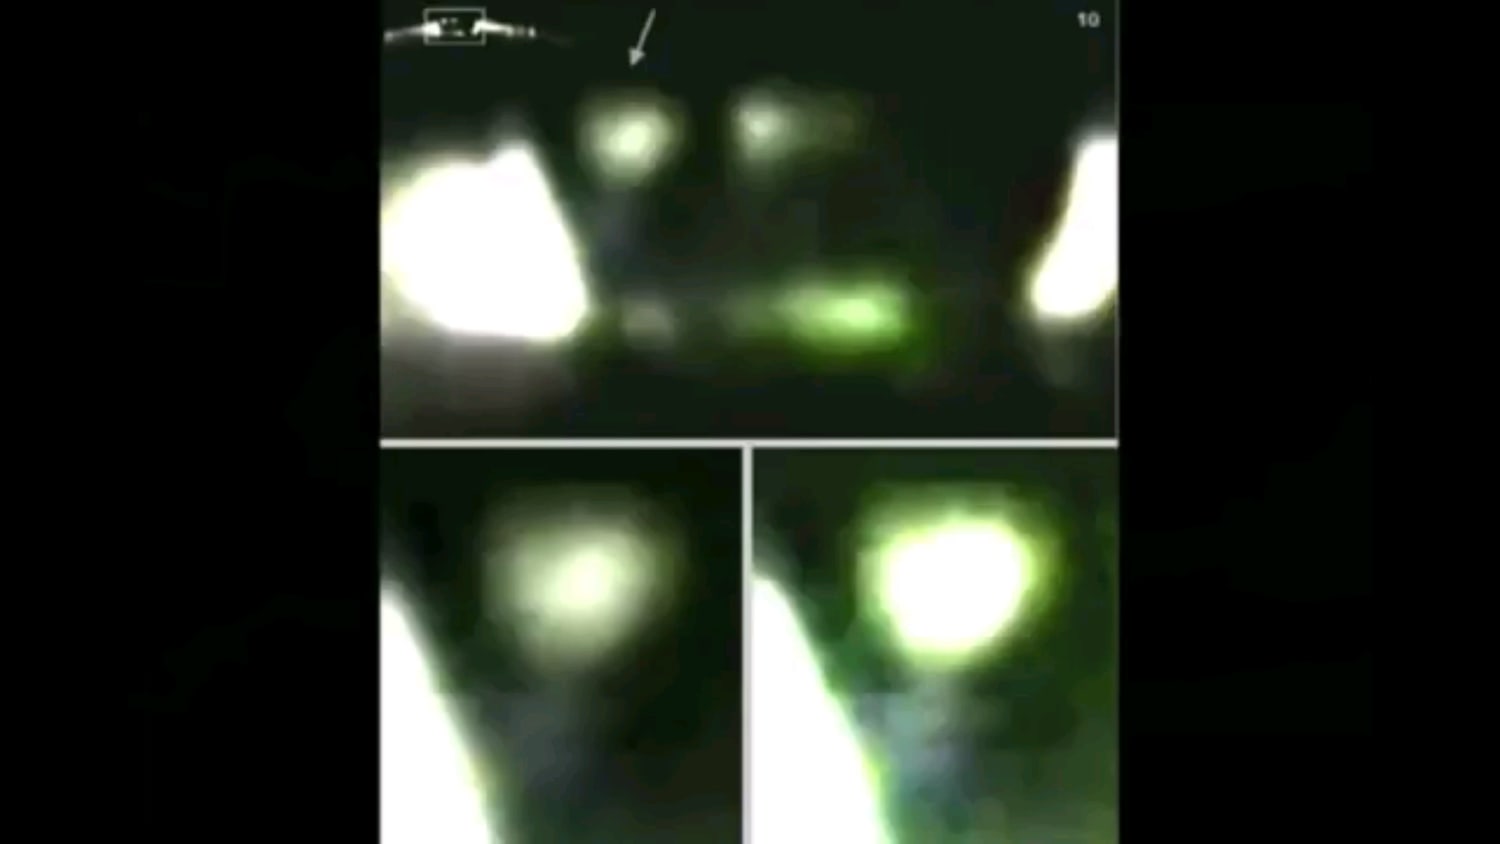 A quick clip of the top UFO/UAP videos available here on the pages of Reddit.